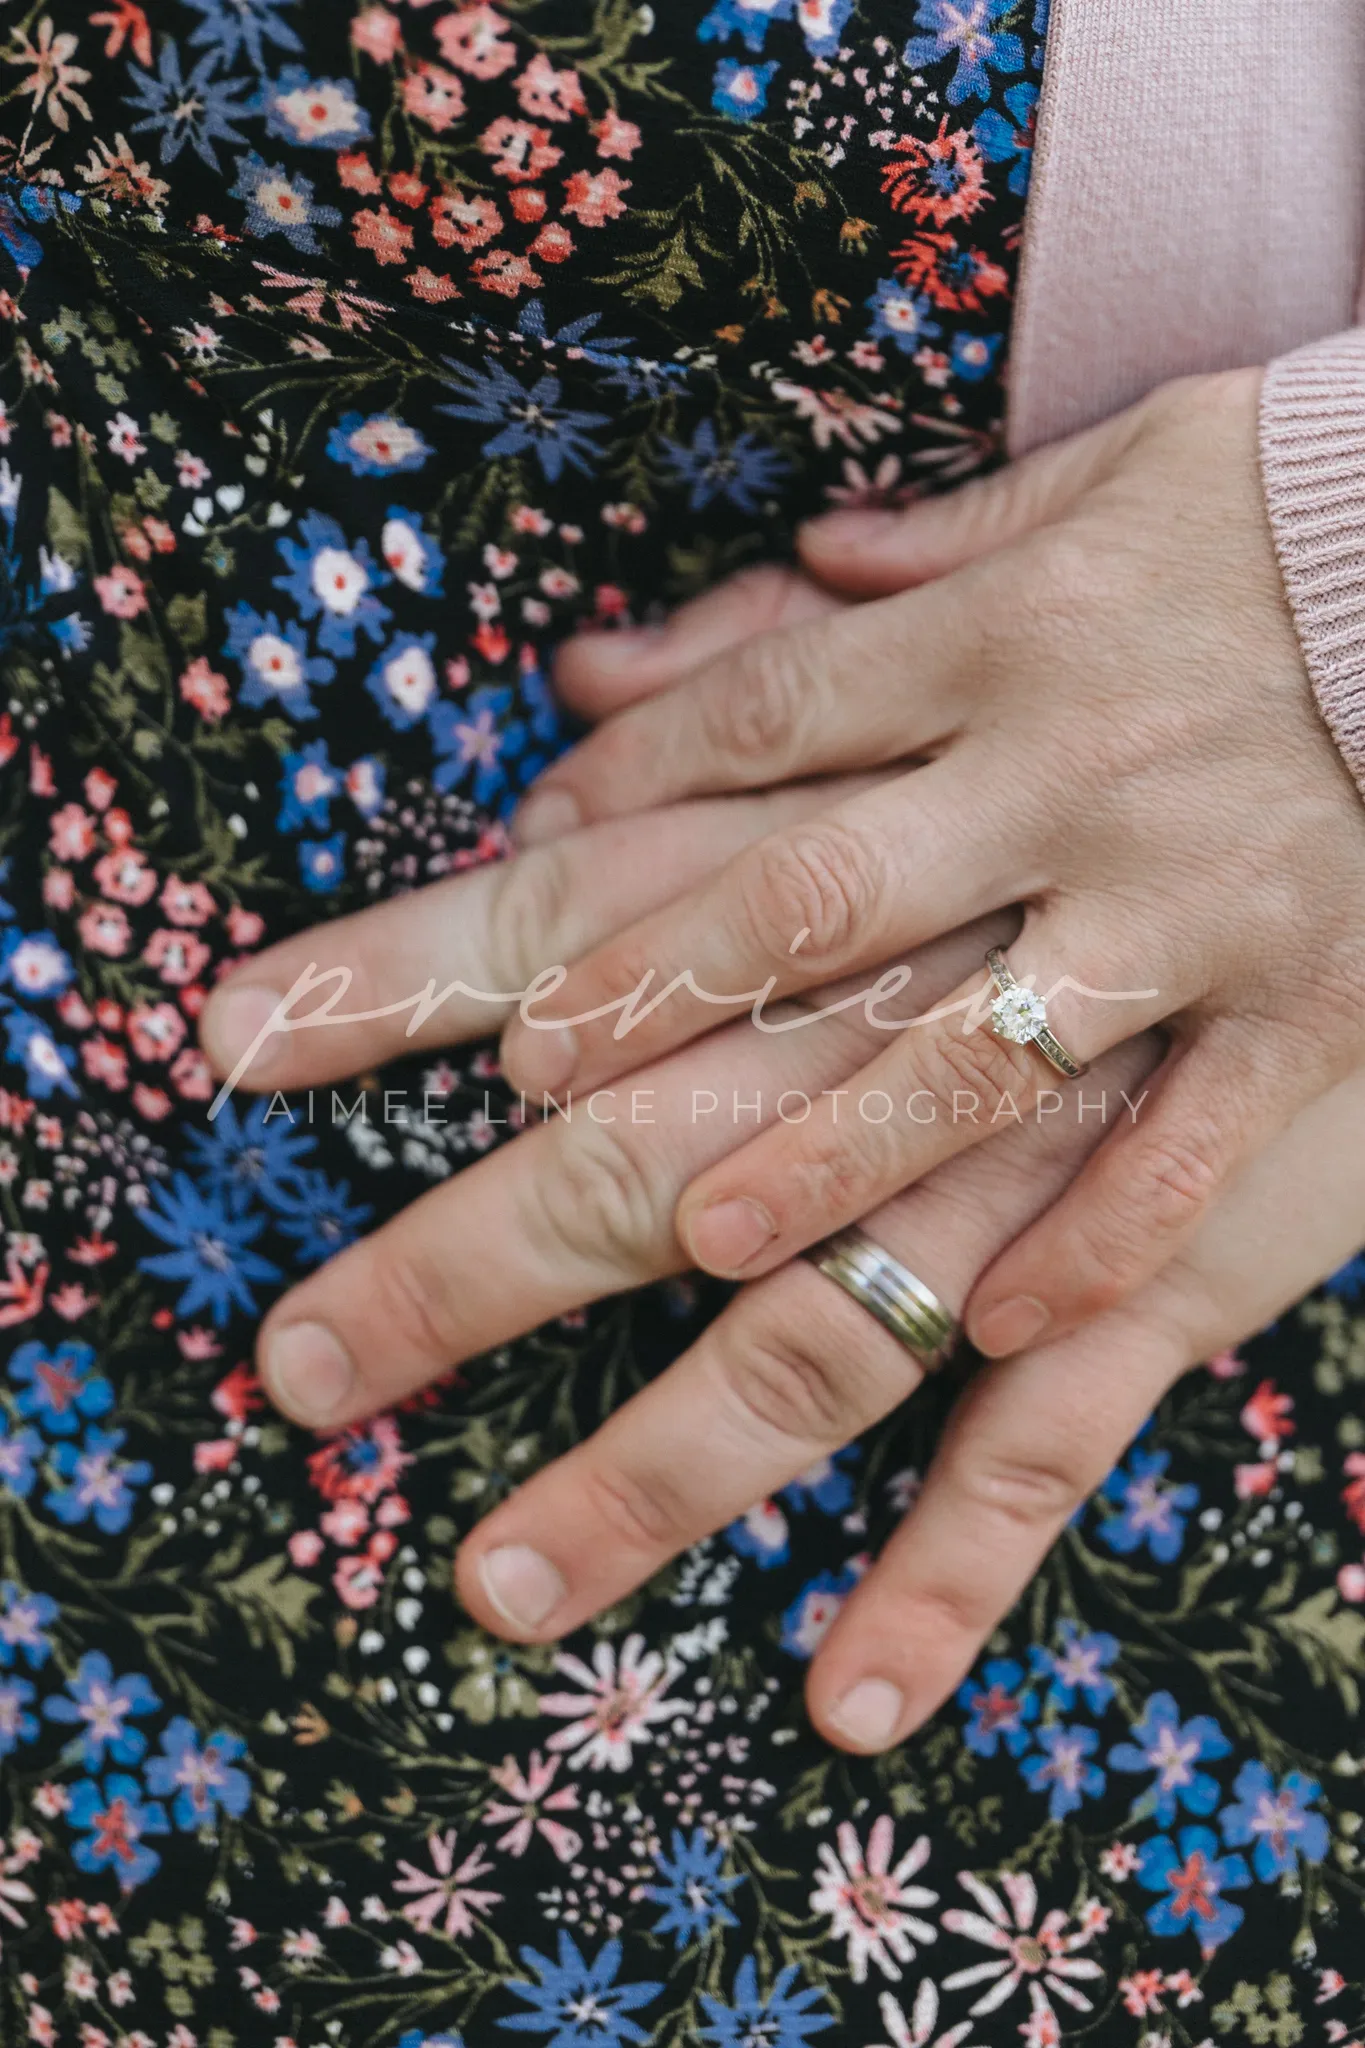 A close-up image of a couple's hands on a floral background. The woman's hand has a sparkling engagement ring, placed atop the man's hand that features a wedding band. The watermark reads